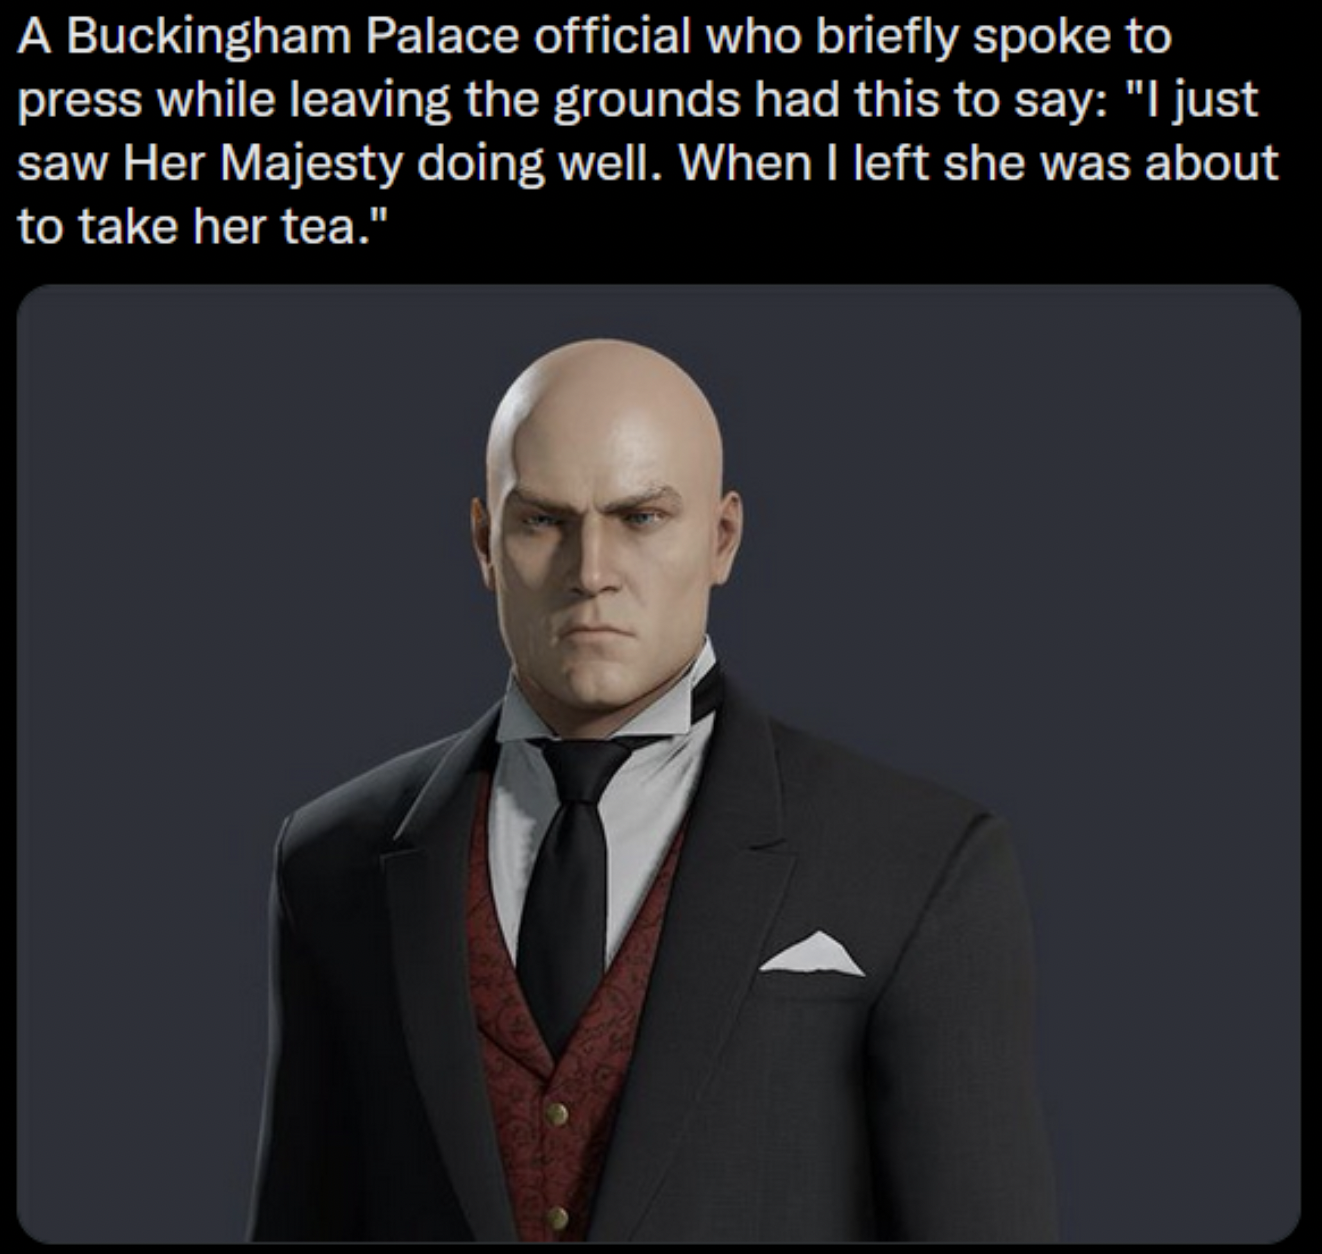 Gaming memes - gentleman - A Buckingham Palace official who briefly spoke to press while leaving the grounds had this to say